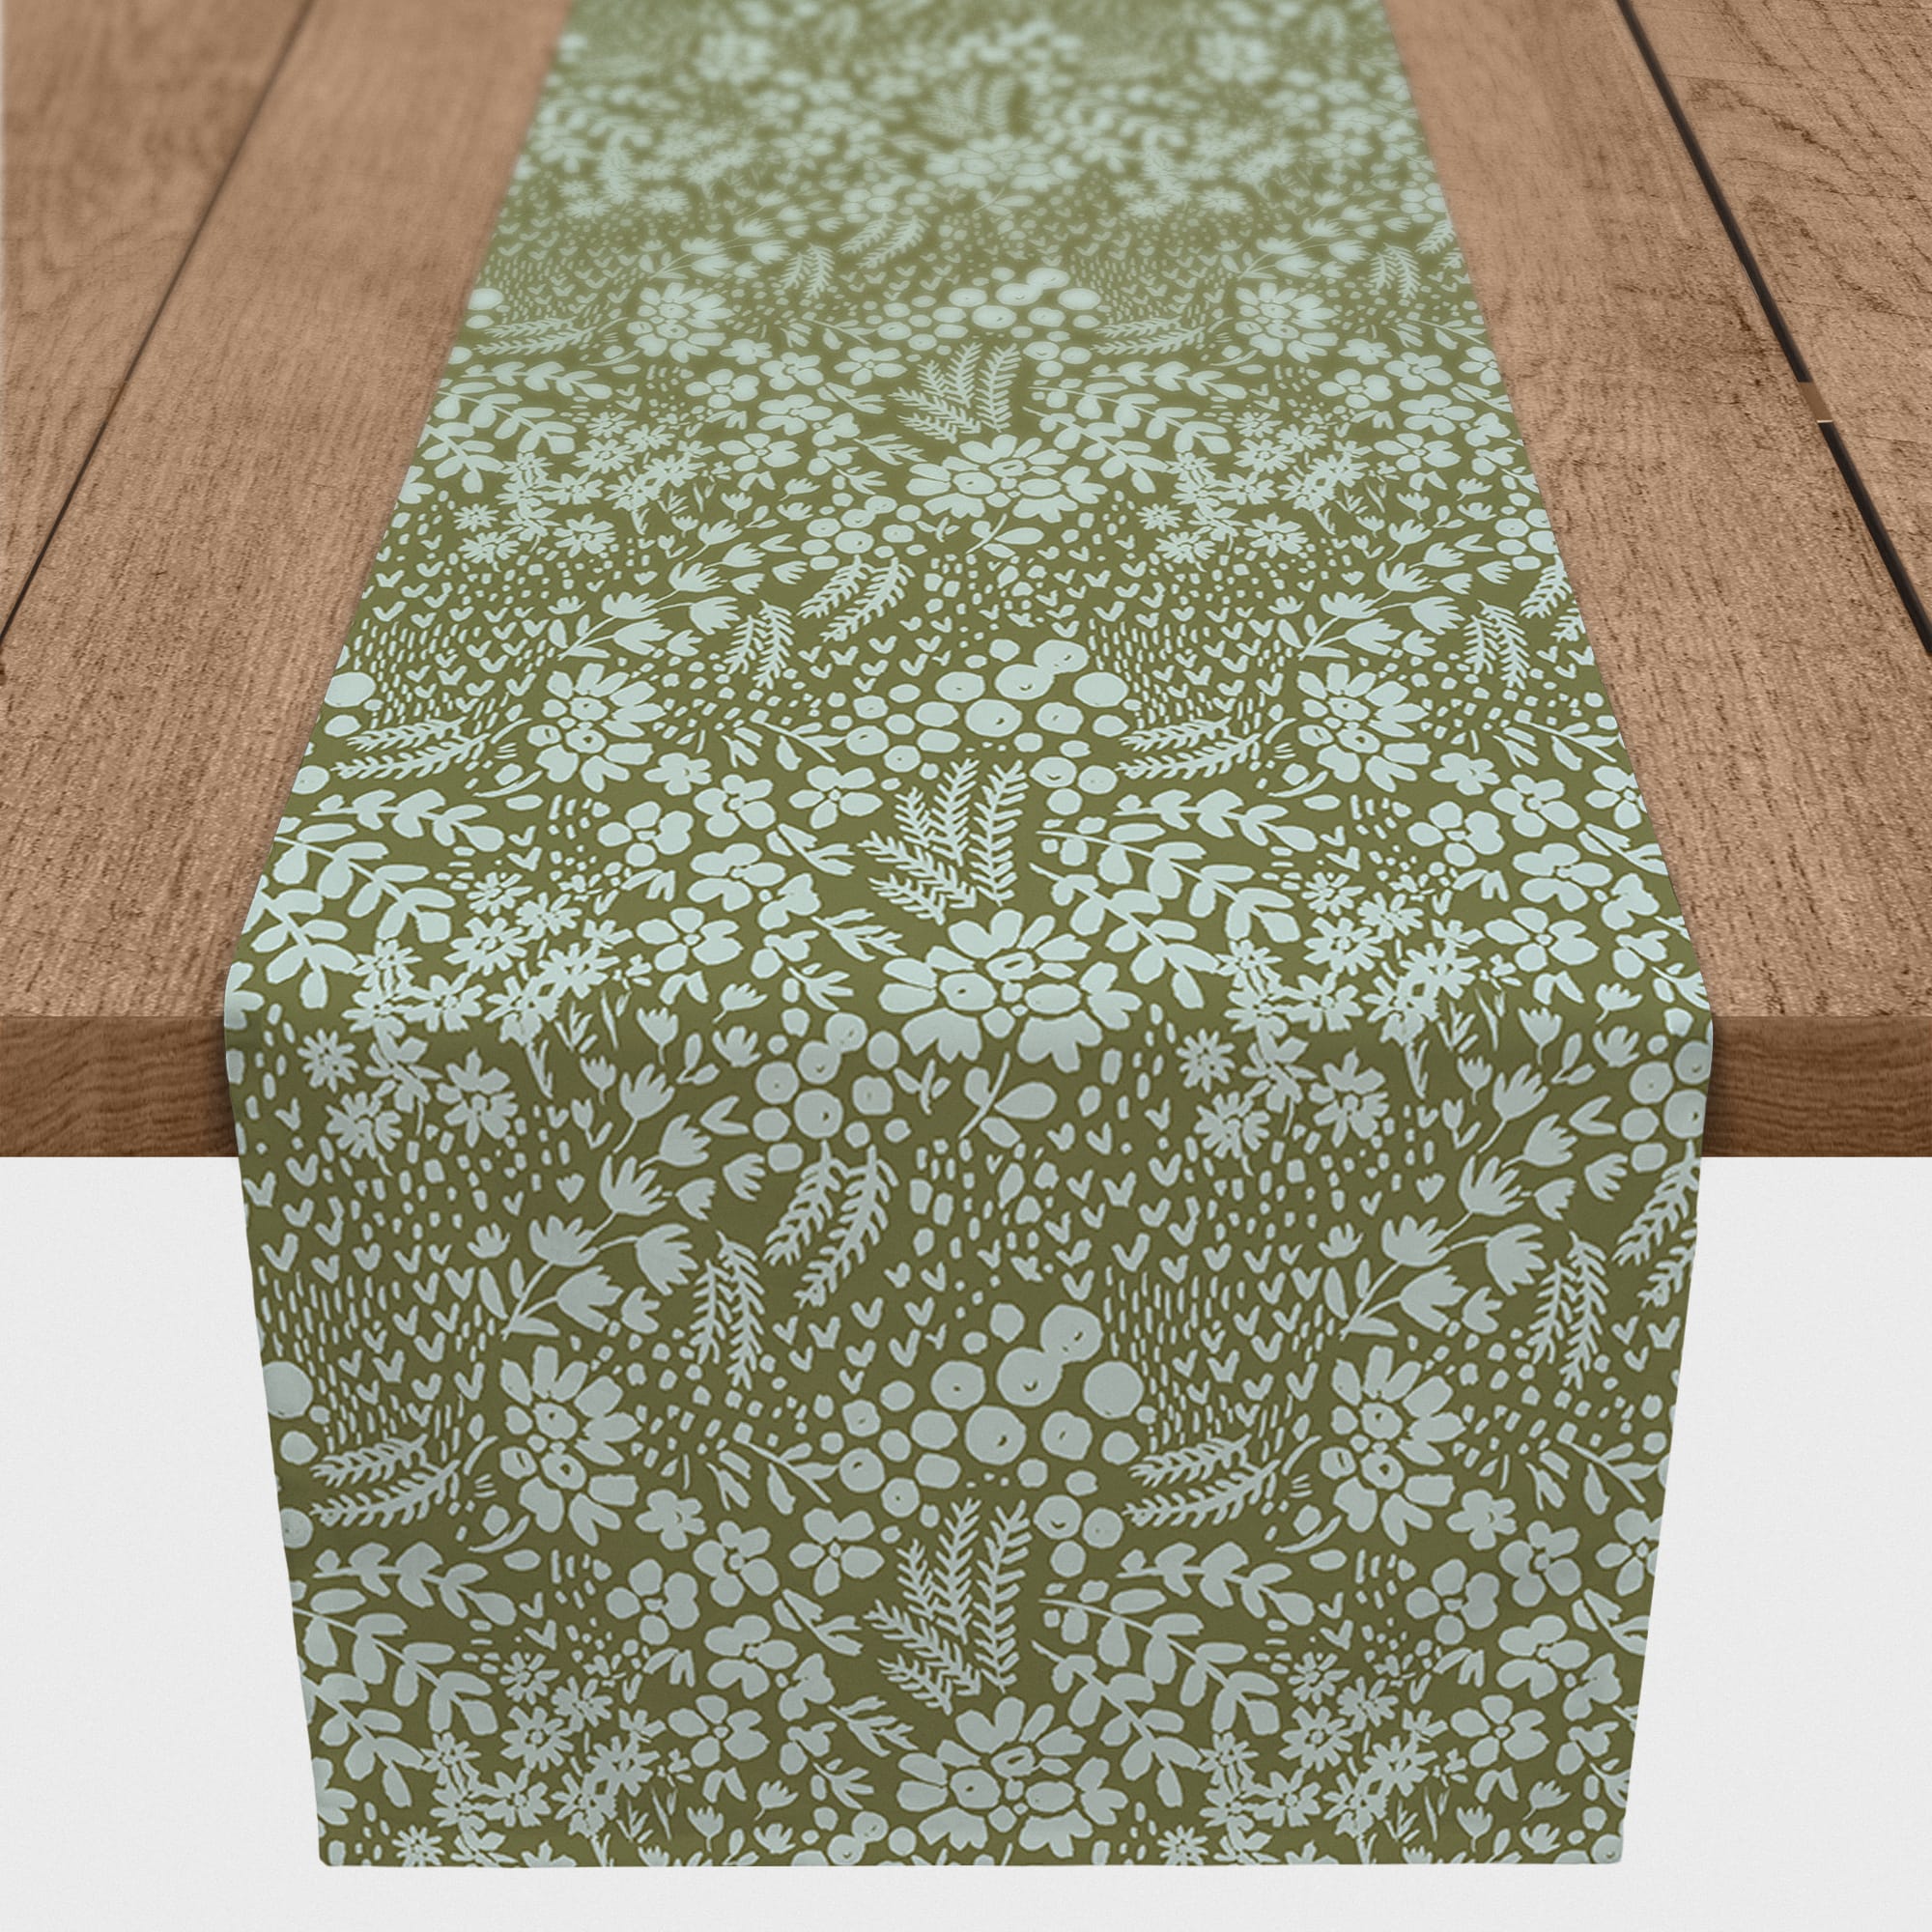 90" Dainty Floral Cotton Twill Table Runner